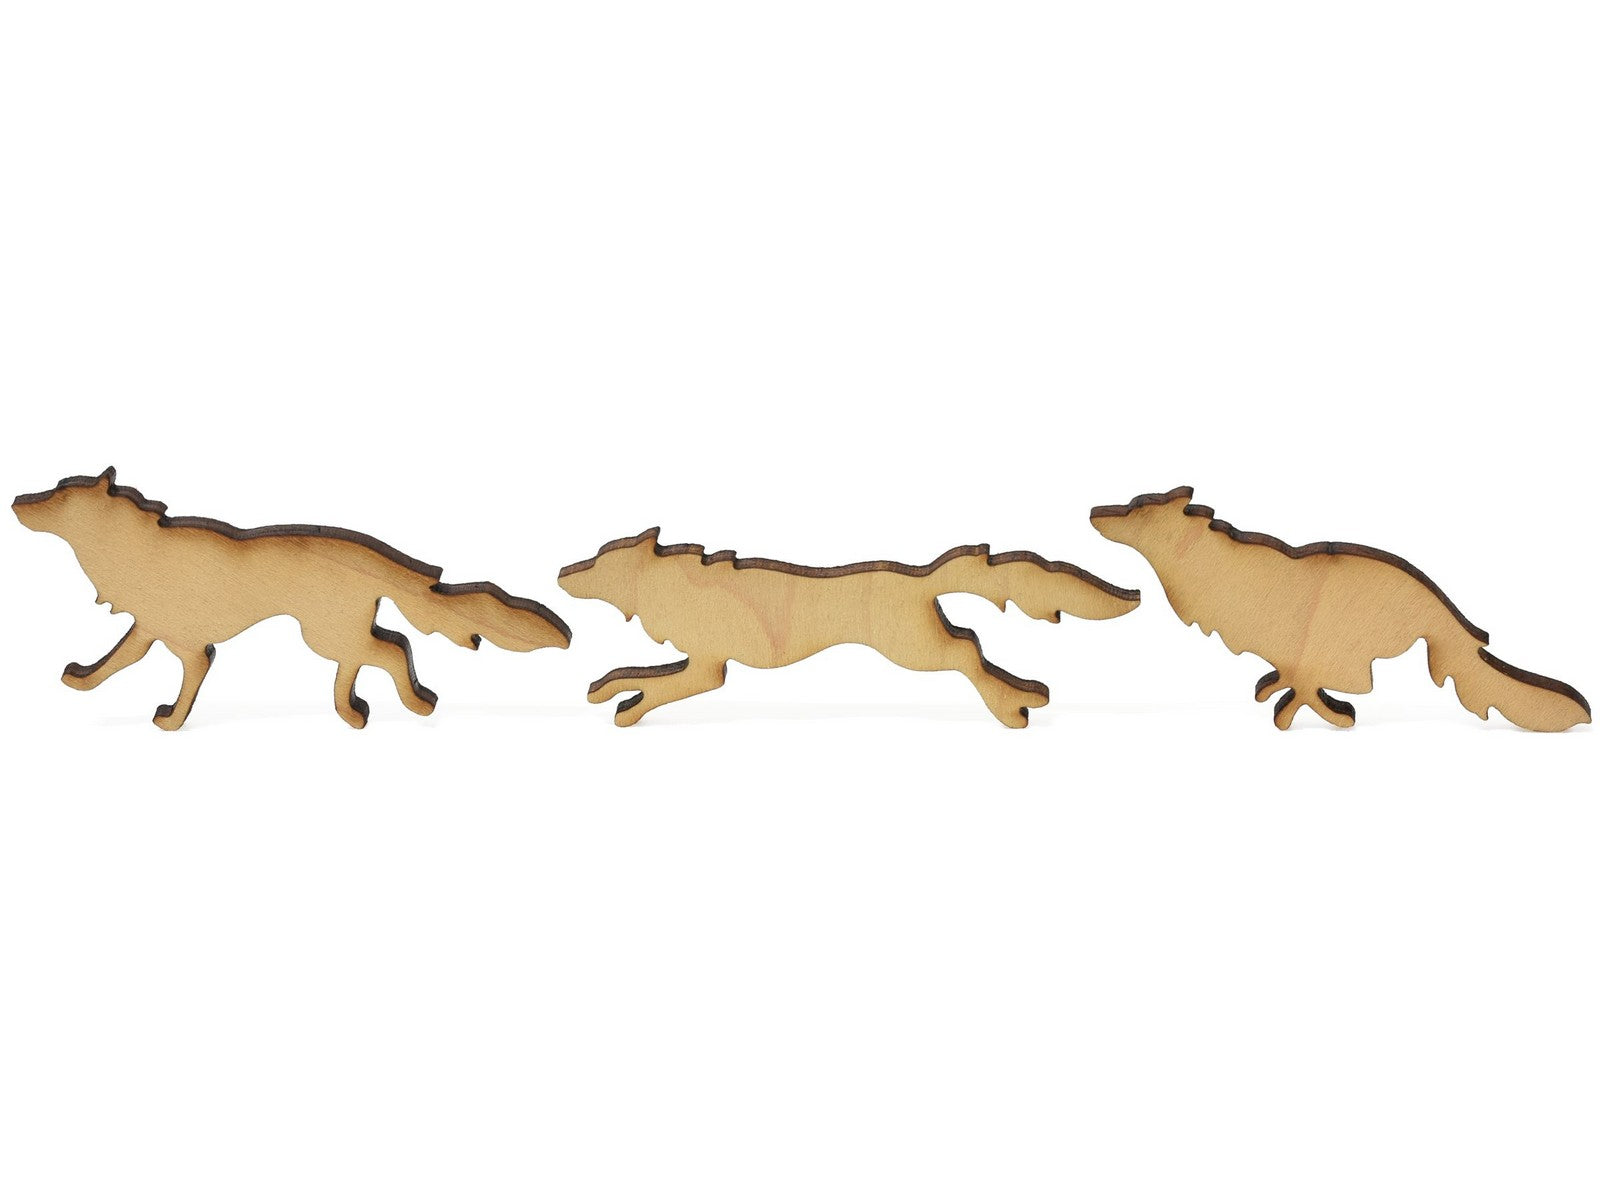 A closeup of pieces showing a pack of wolves running.